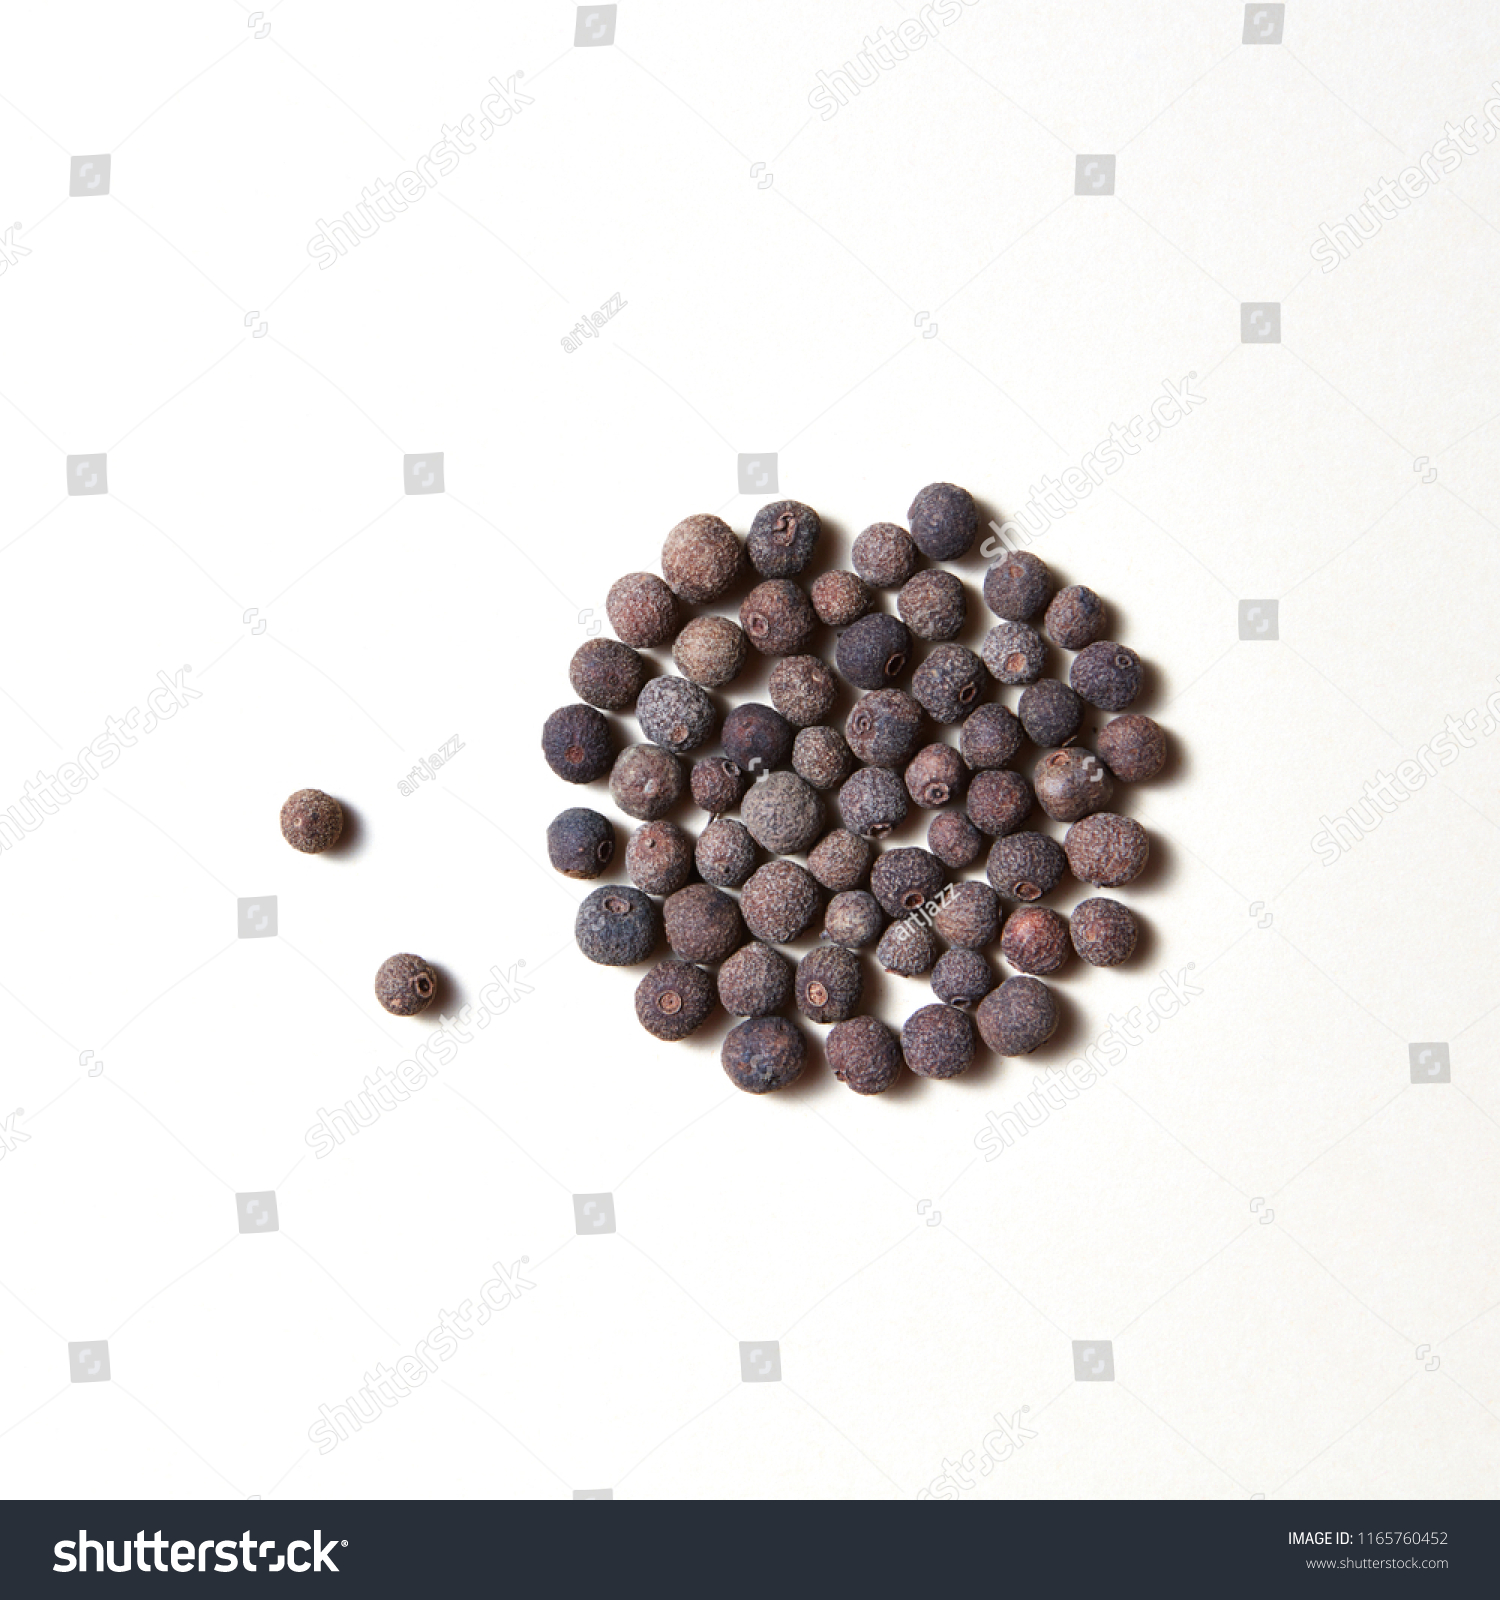 Dried whole allspice, jamaica peper - spice for culinary cooking isolated on white background with copy space. #1165760452